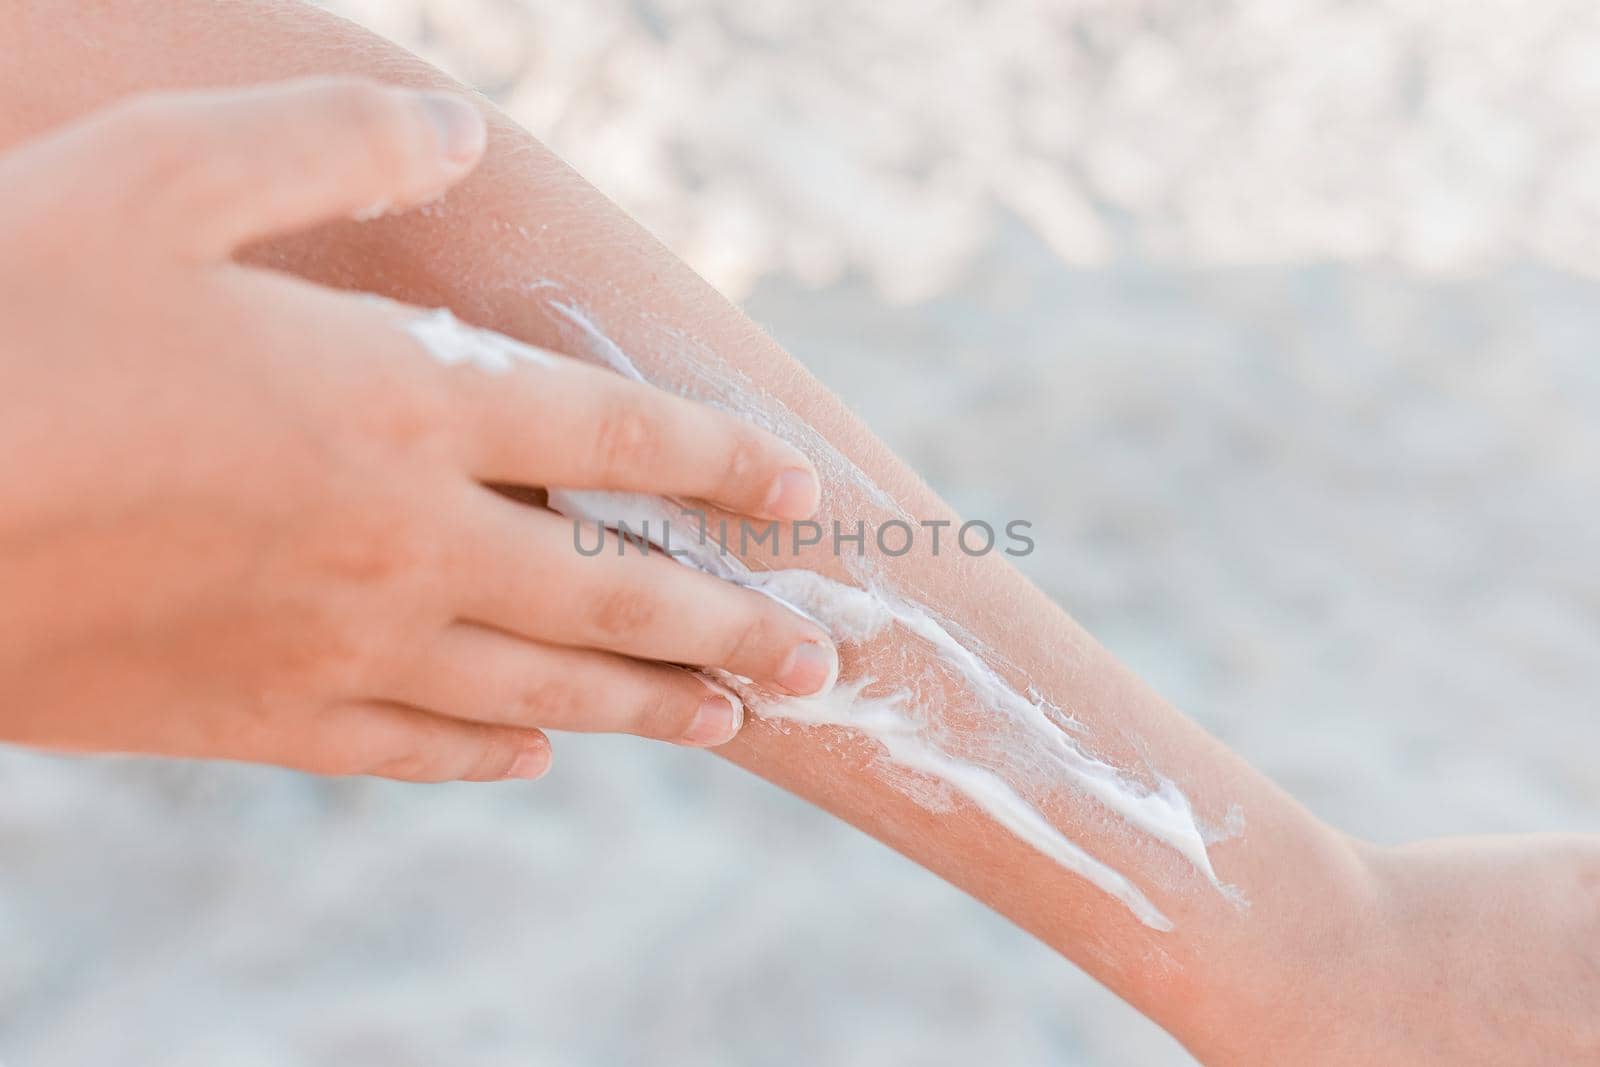 The hand of a young girl smears sunscreen and sun protection on the second hand against the background of the beach, close-up by AYDO8